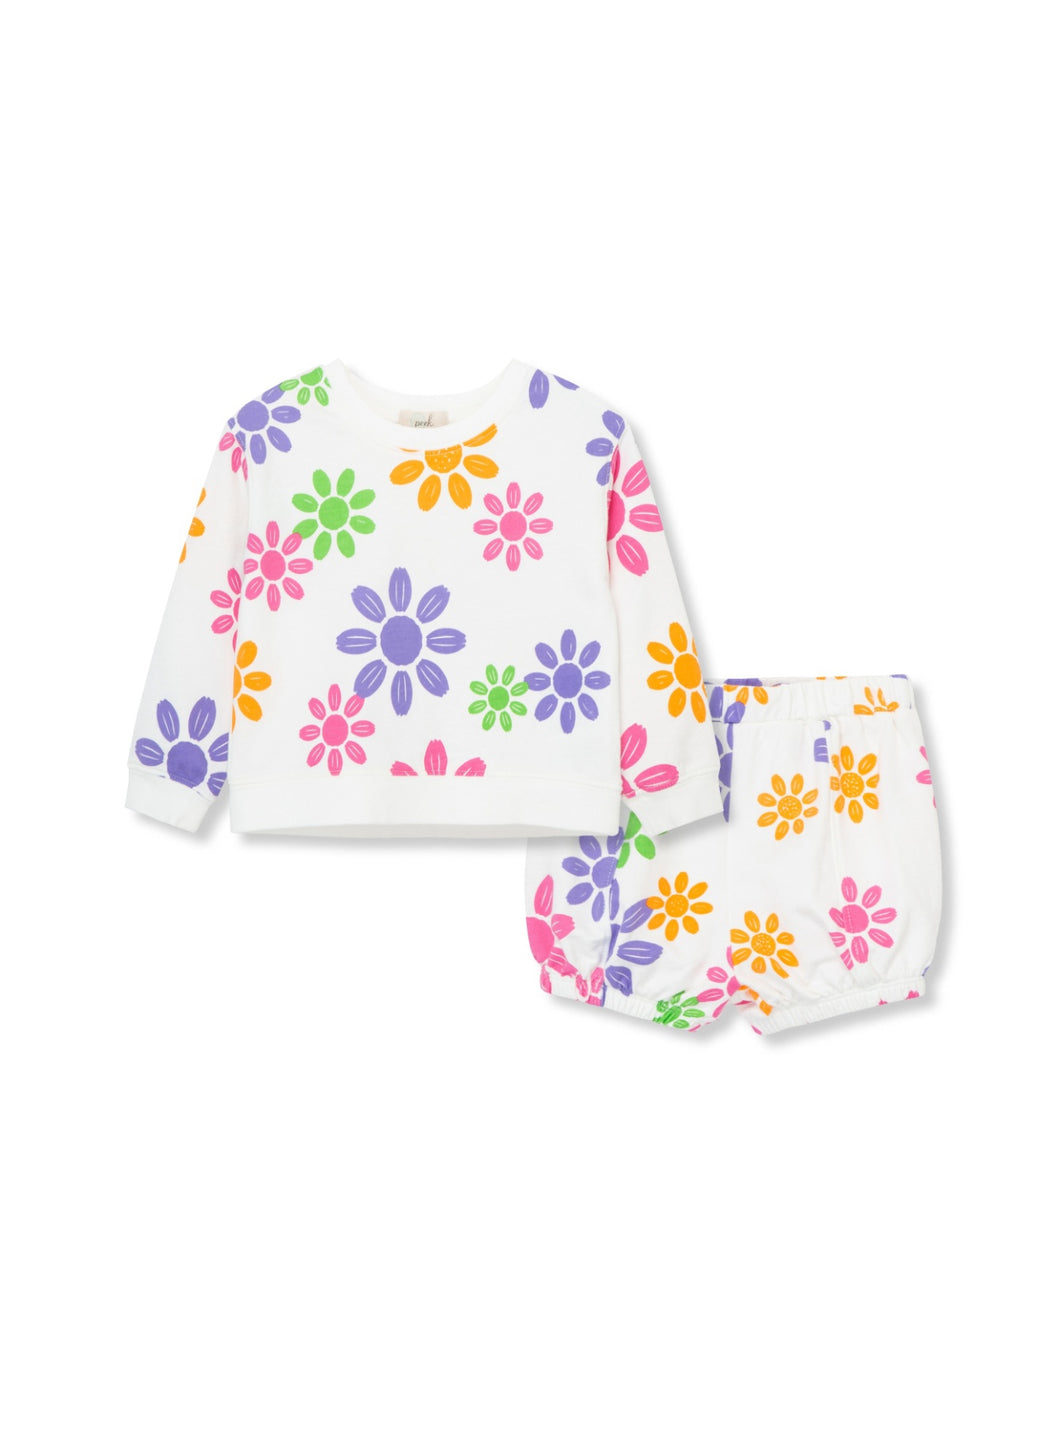 Floral French Terry Set